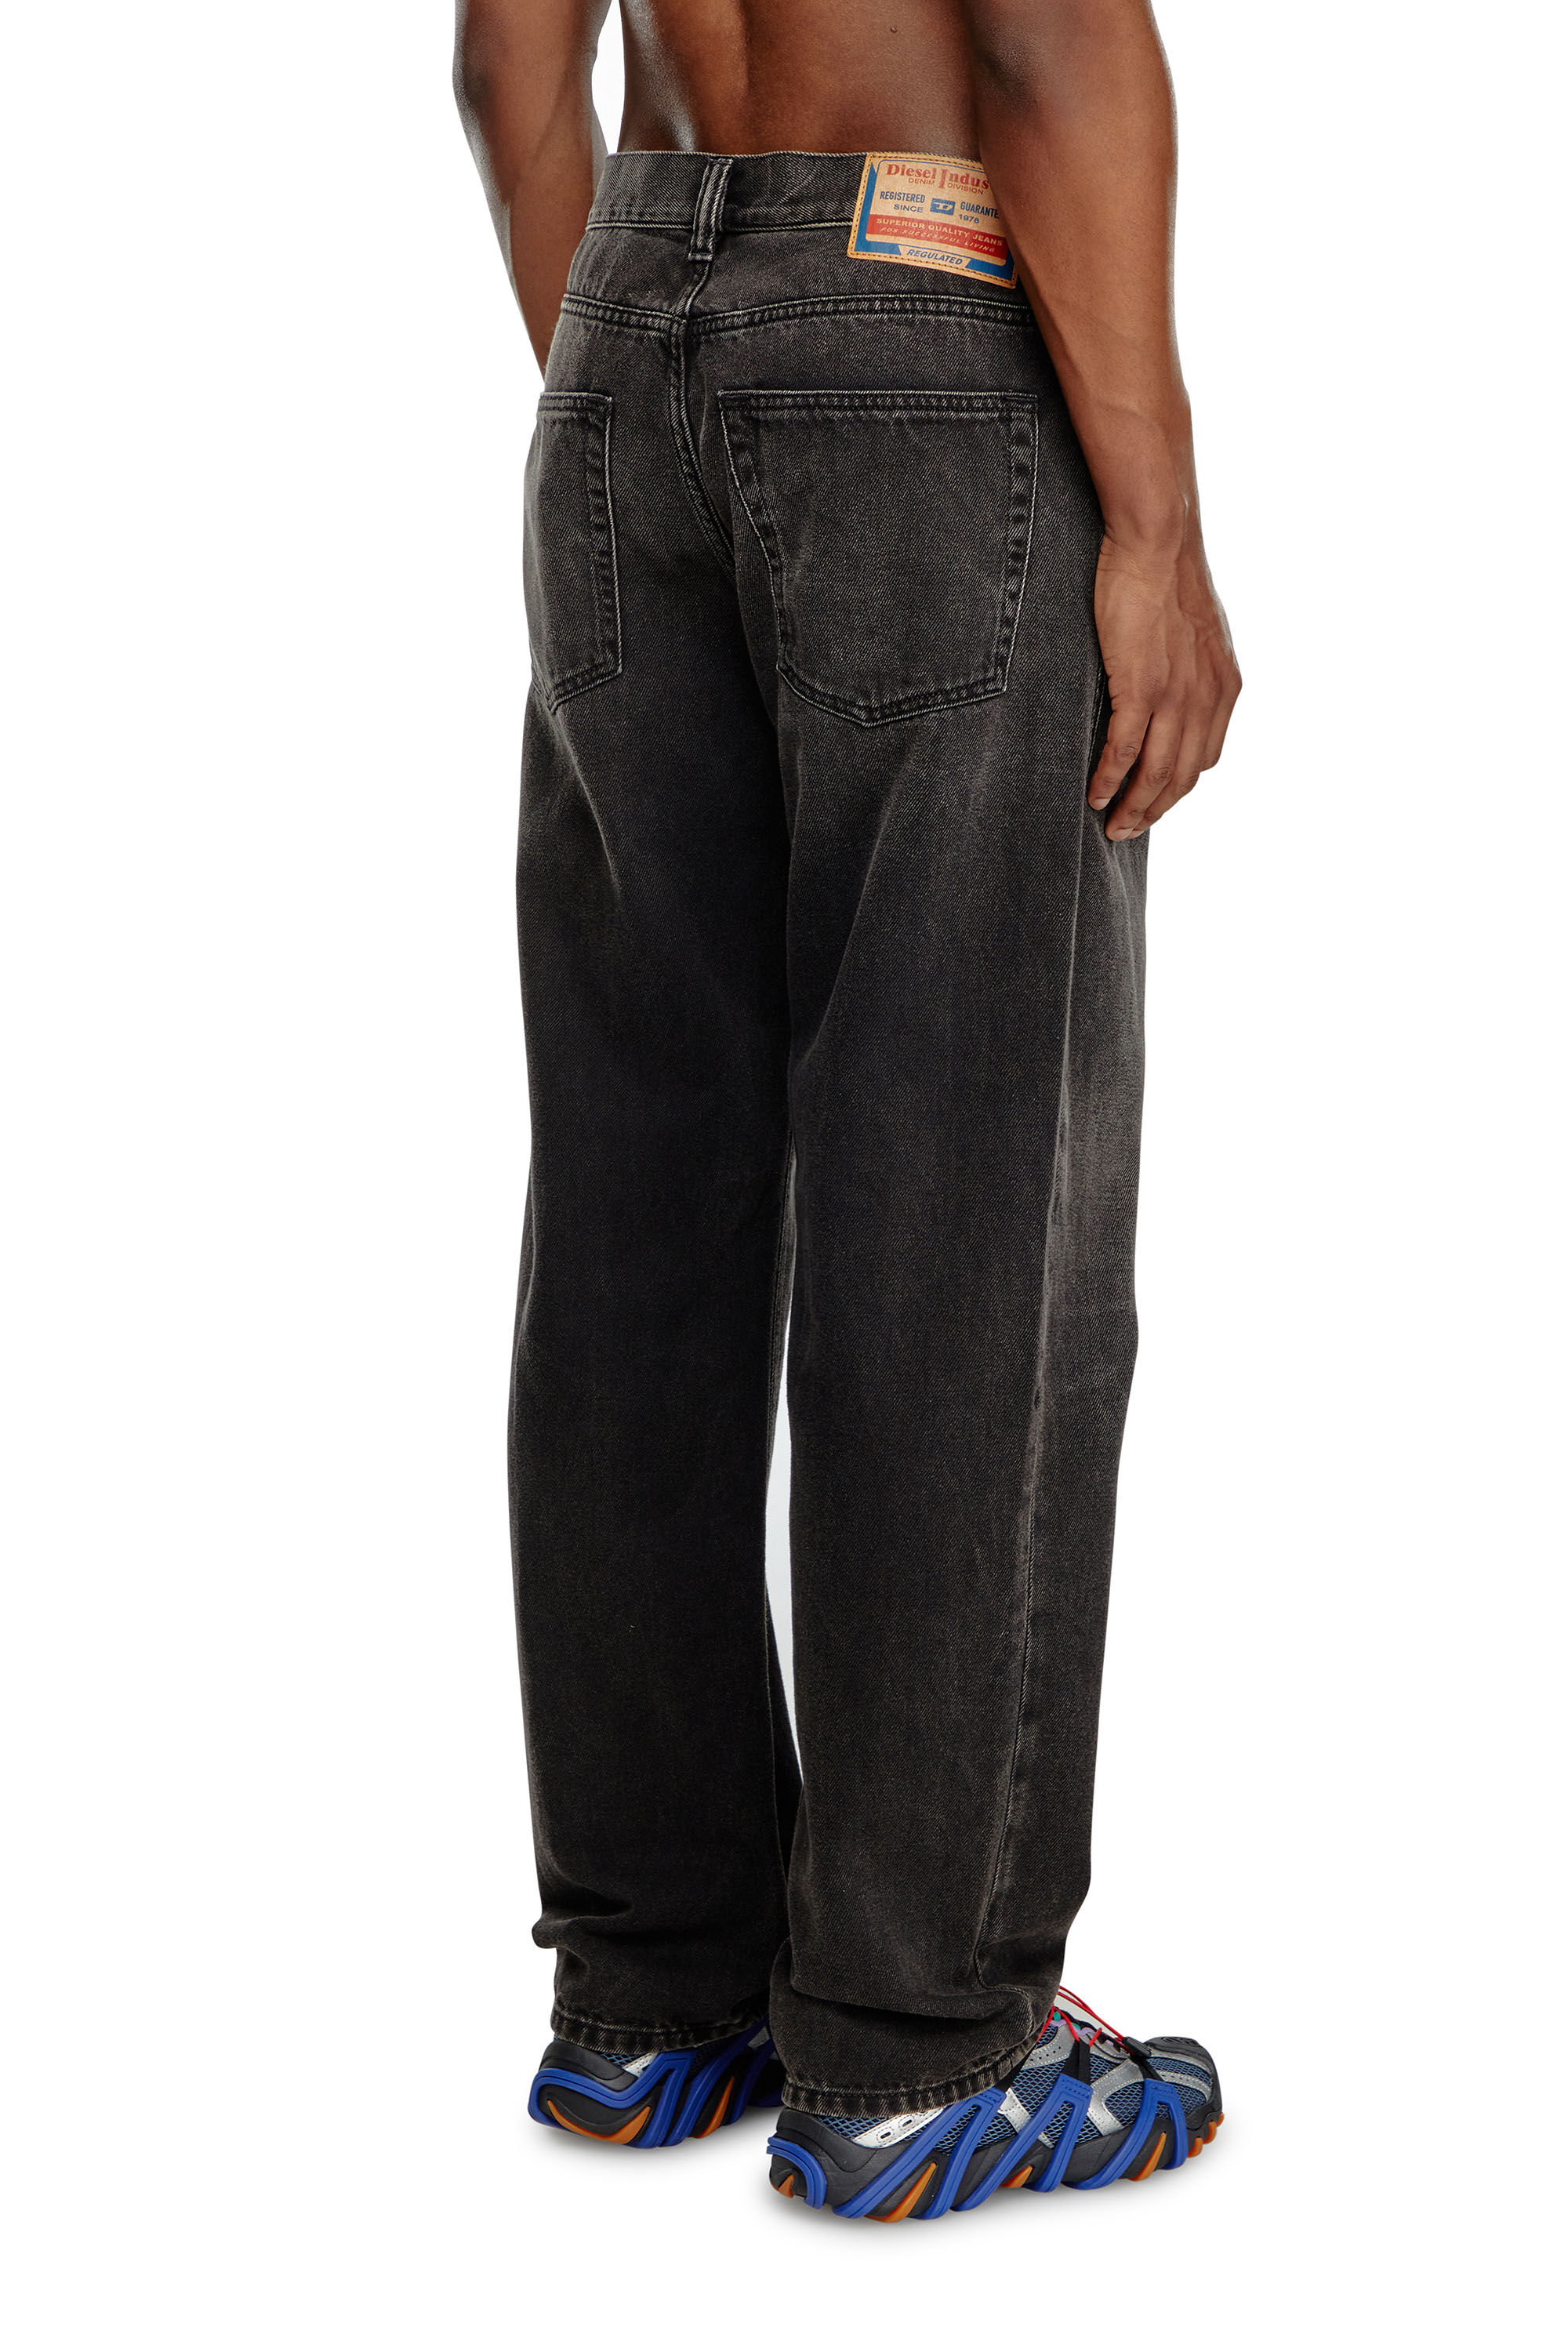 Diesel - Straight Jeans 2010 D-Macs 09J96, Hombre Straight Jeans - 2010 D-Macs in Negro - Image 4